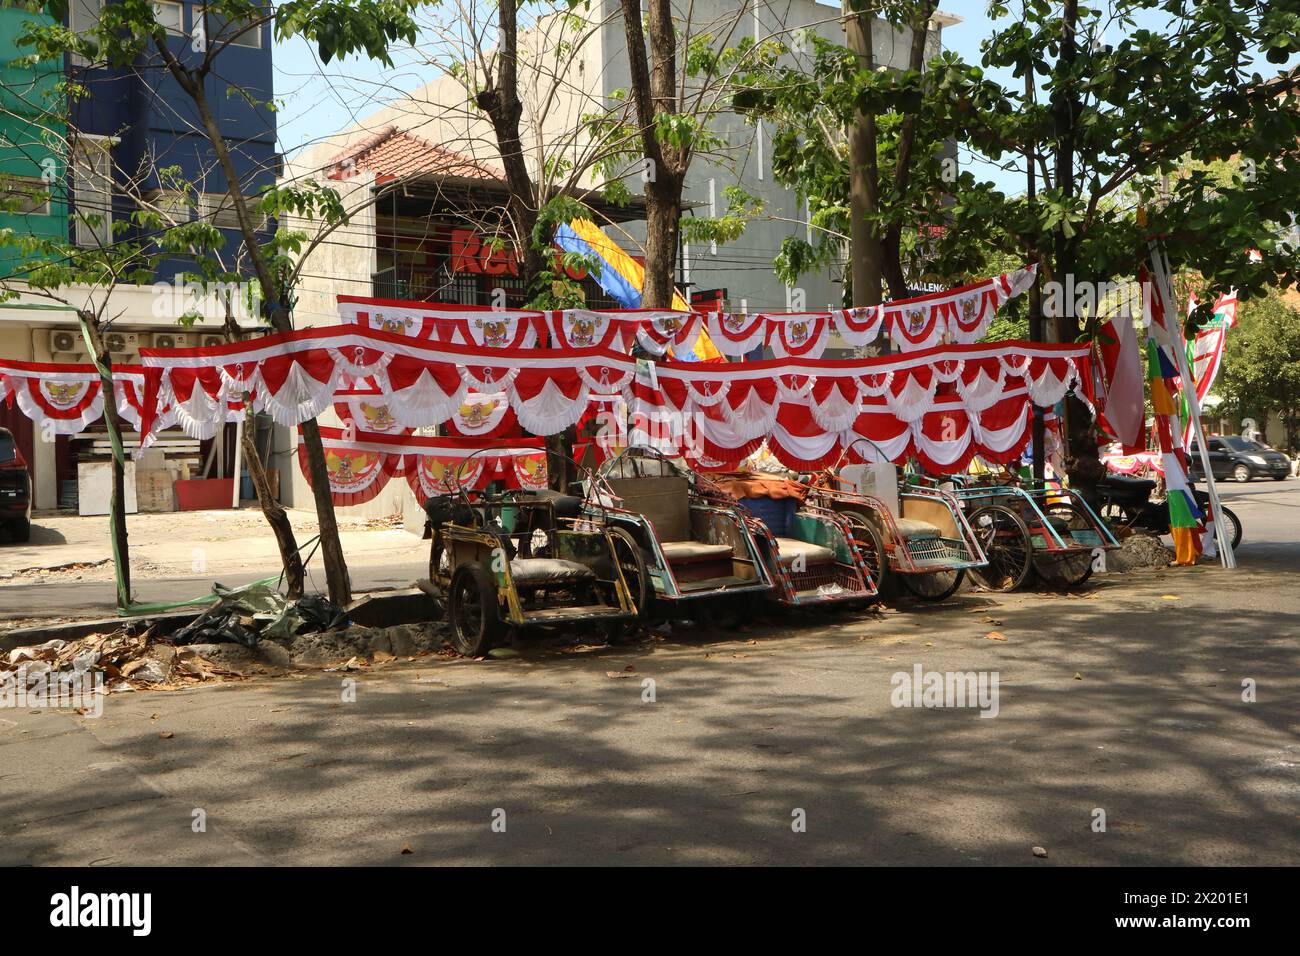 Flag vendors sell at a pedestrian street. This flags usually used as decoration during Indonesia independence day commemoration. Stock Photo